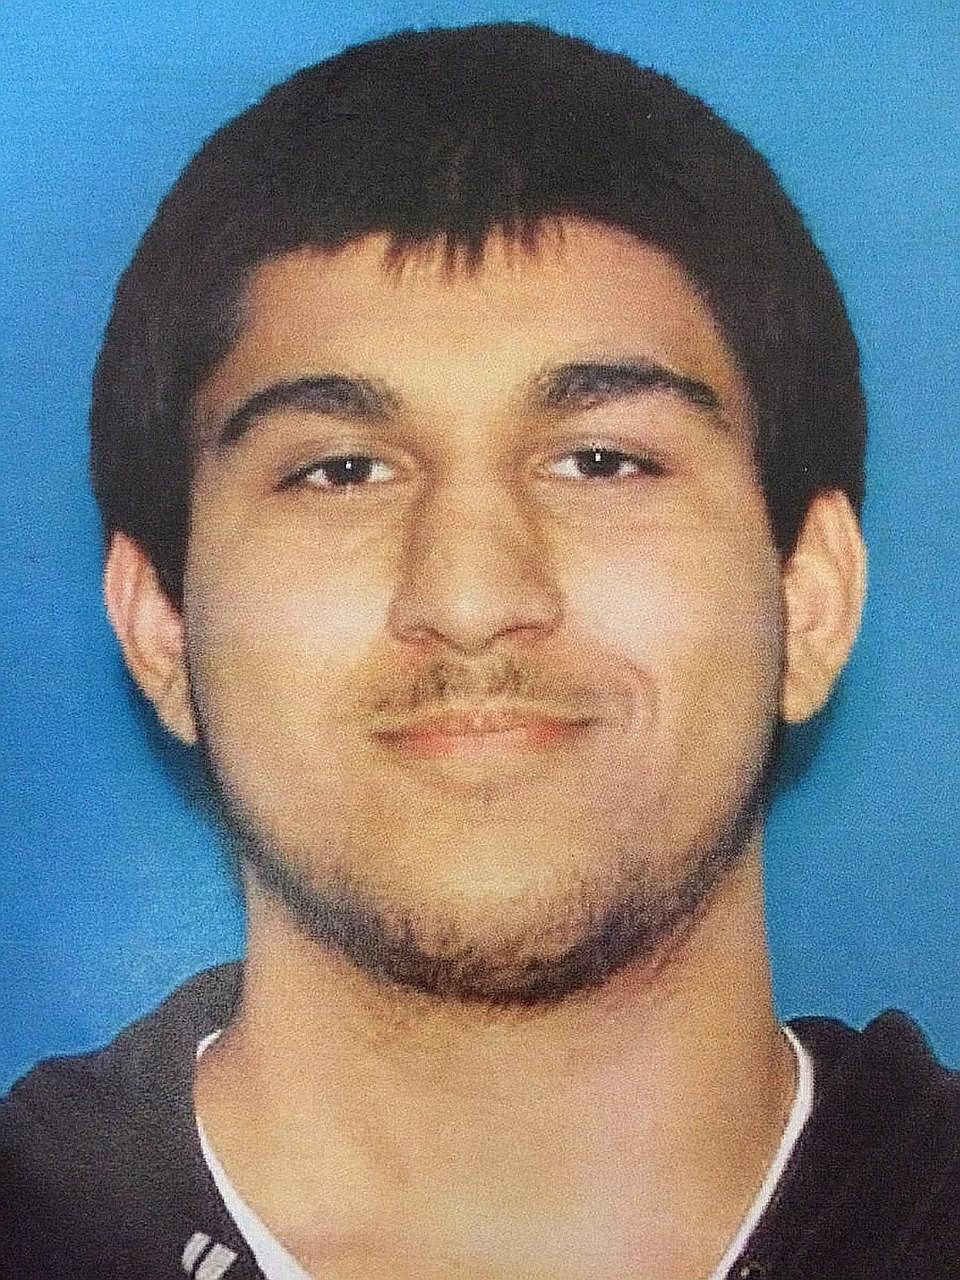 Cetin, 20, was arrested about 24 hours after five people were shot dead at a mall in Washington.